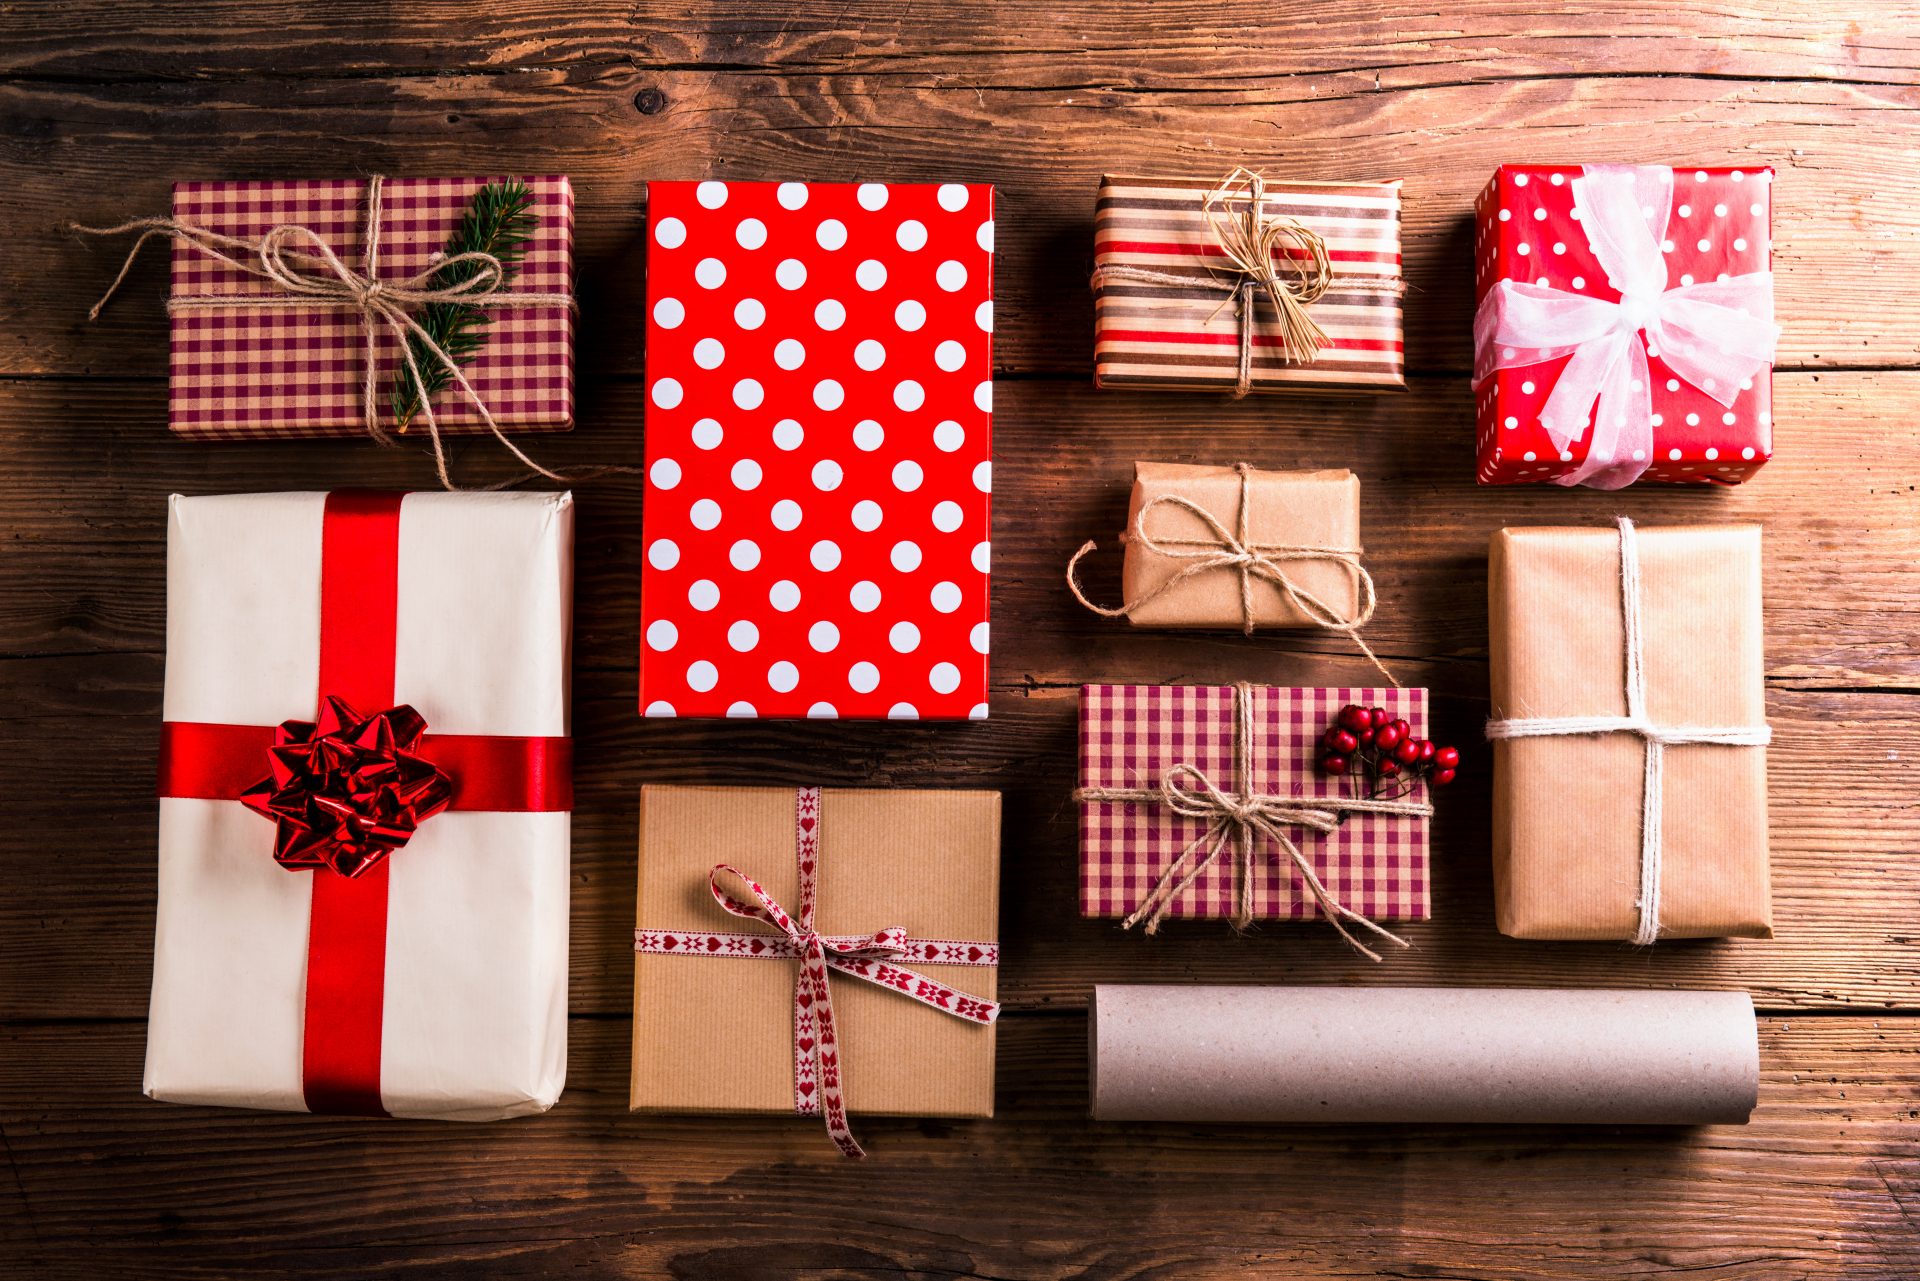 250+ Frugal Gift Ideas For Everyone on Your List